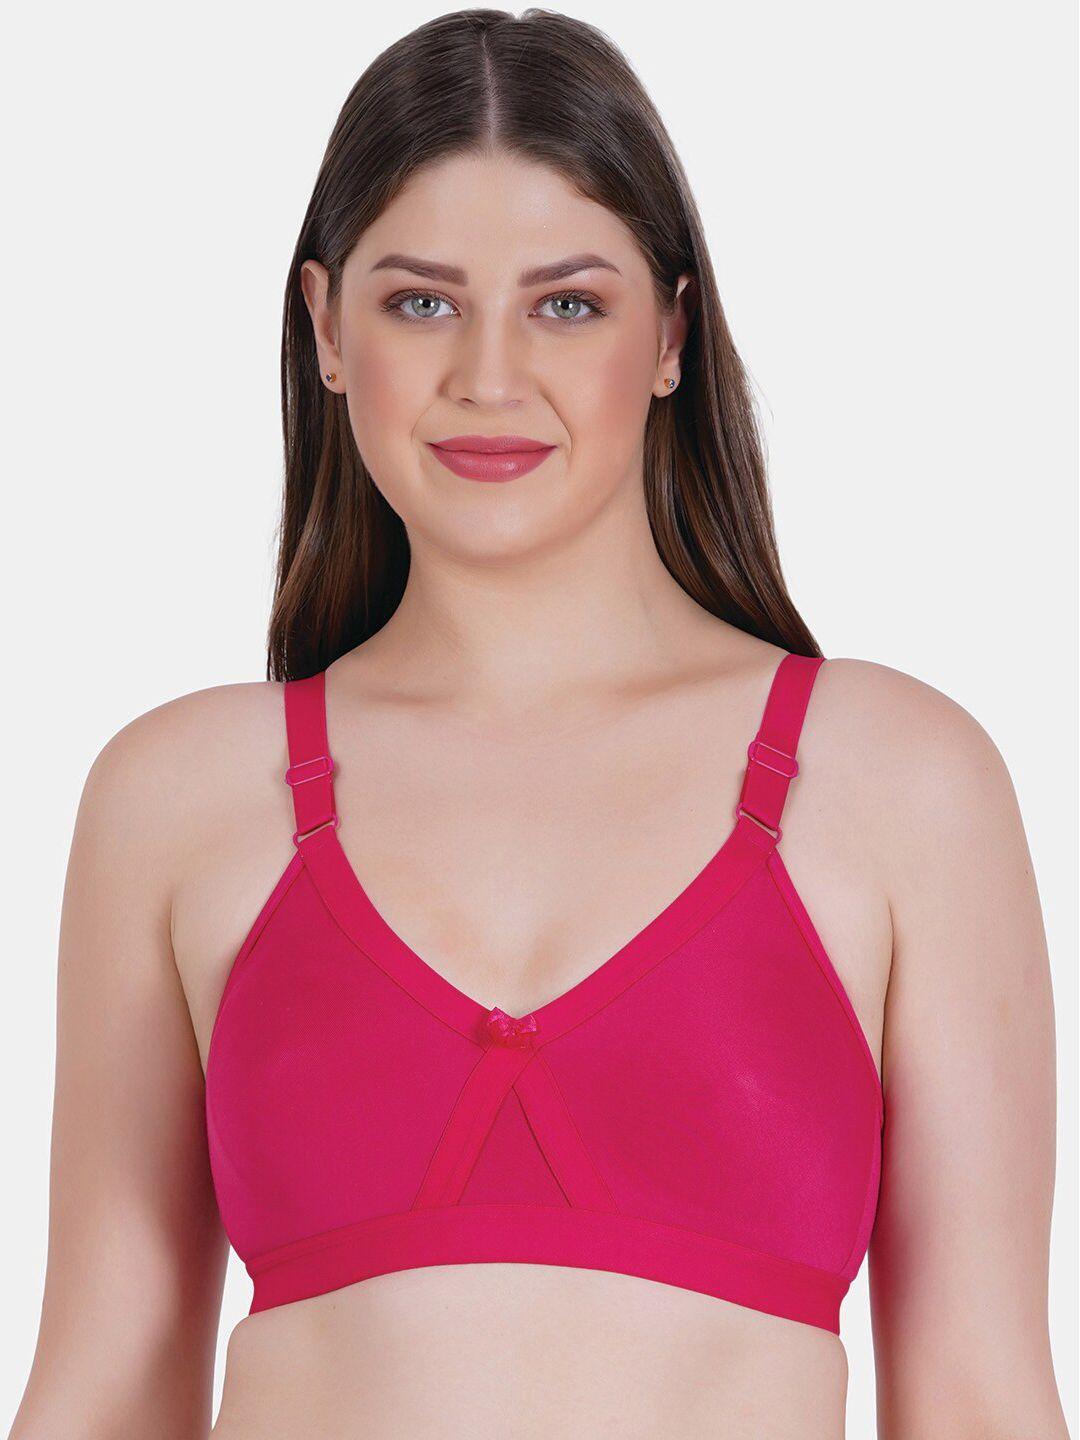 reveira full coverage non padded dry fit technology t-shirt bra with all day comfort